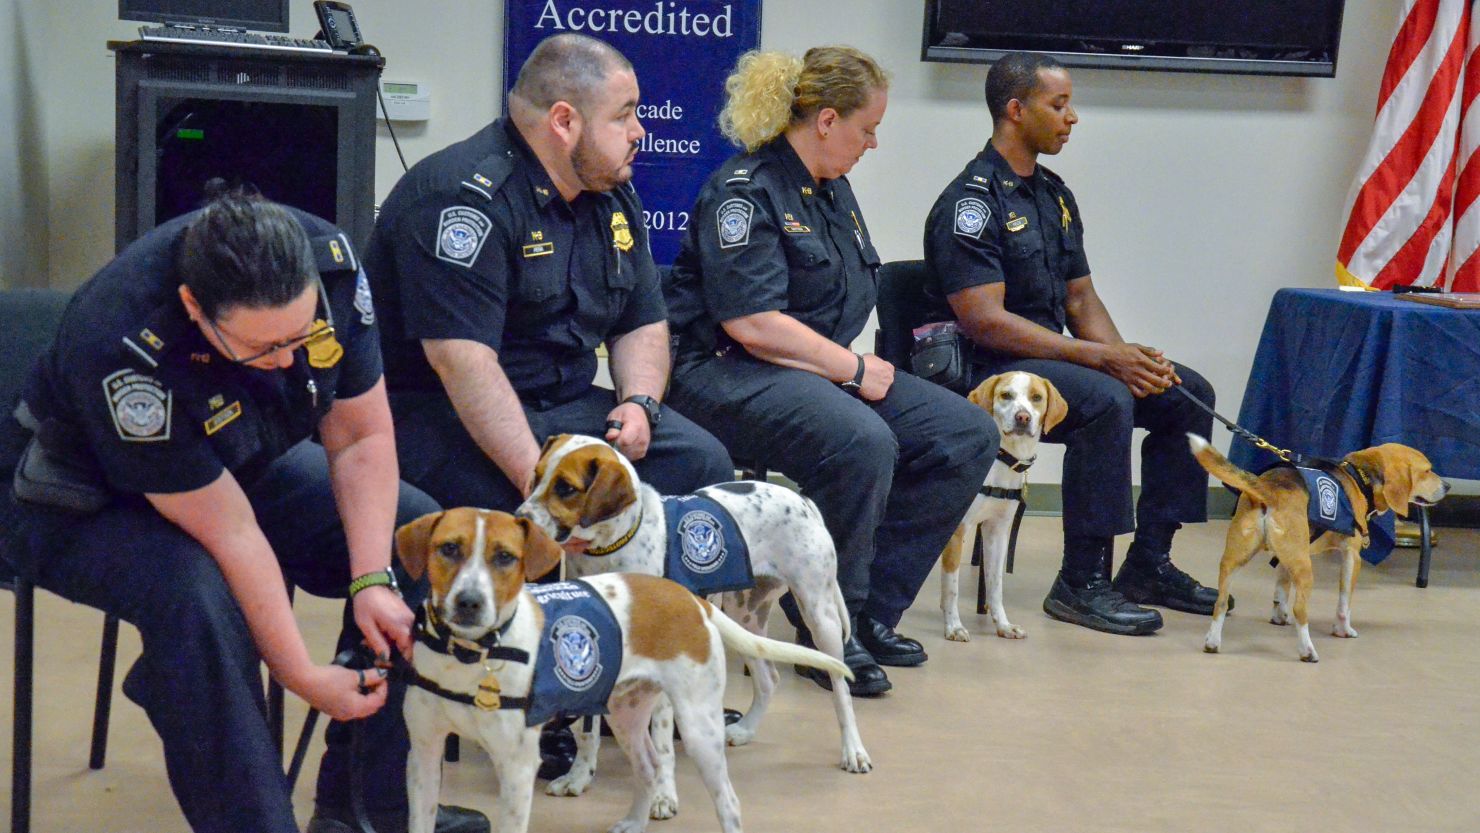 Chaze, Cardie, Marlee and Chipper, as seen from left to right, graduate into the "Beagle Brigade" and wear their uniforms for the first time.